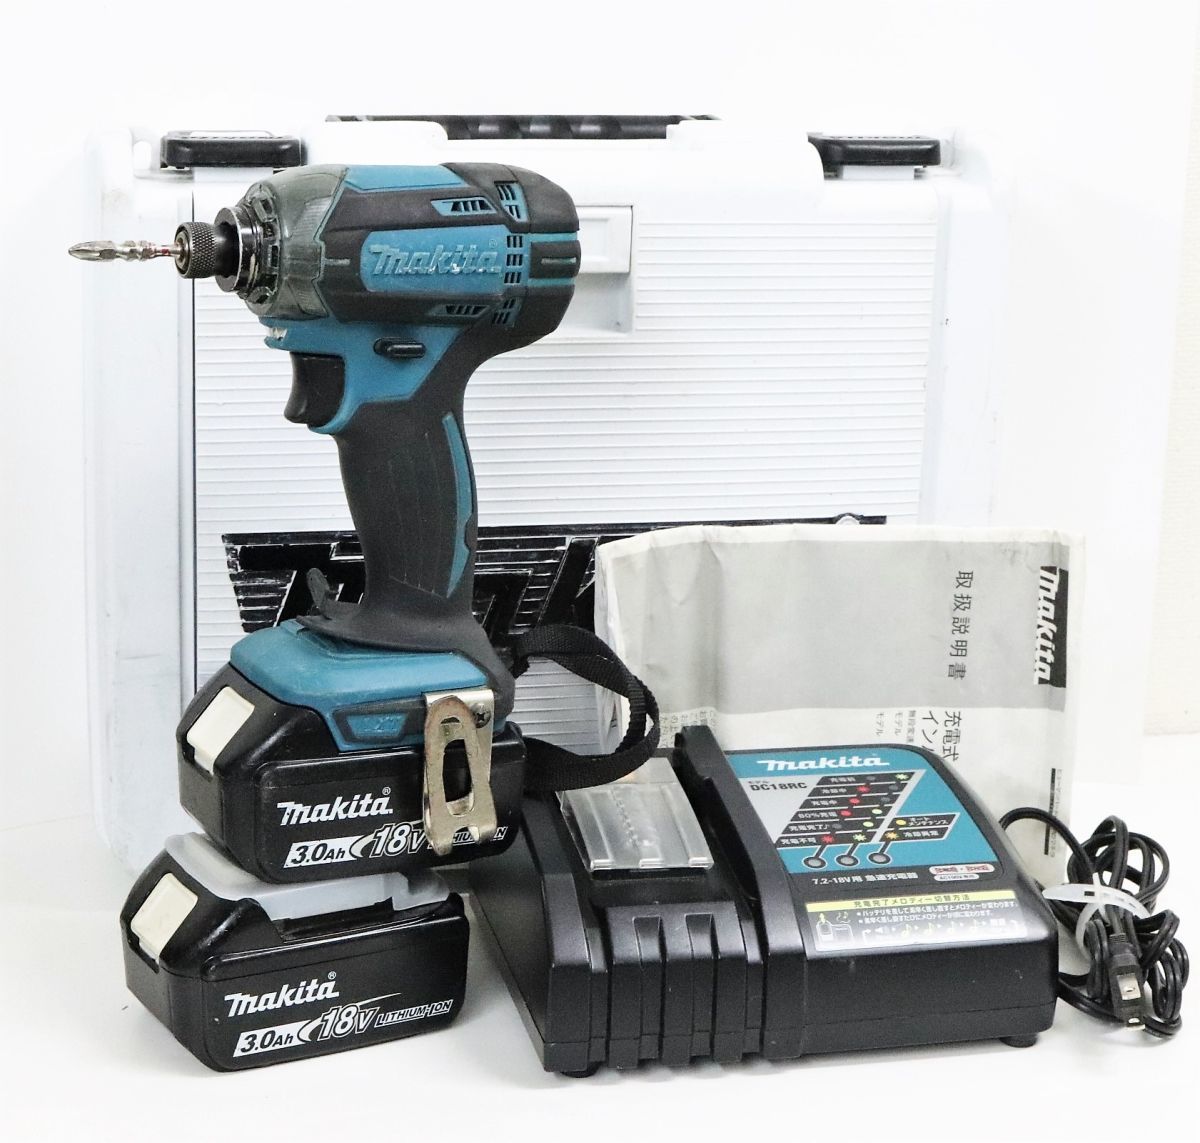  secondhand goods makita Makita rechargeable impact driver TD149DRFX 18V 3.0Ah battery 2 piece attaching set goods blue #4449-1